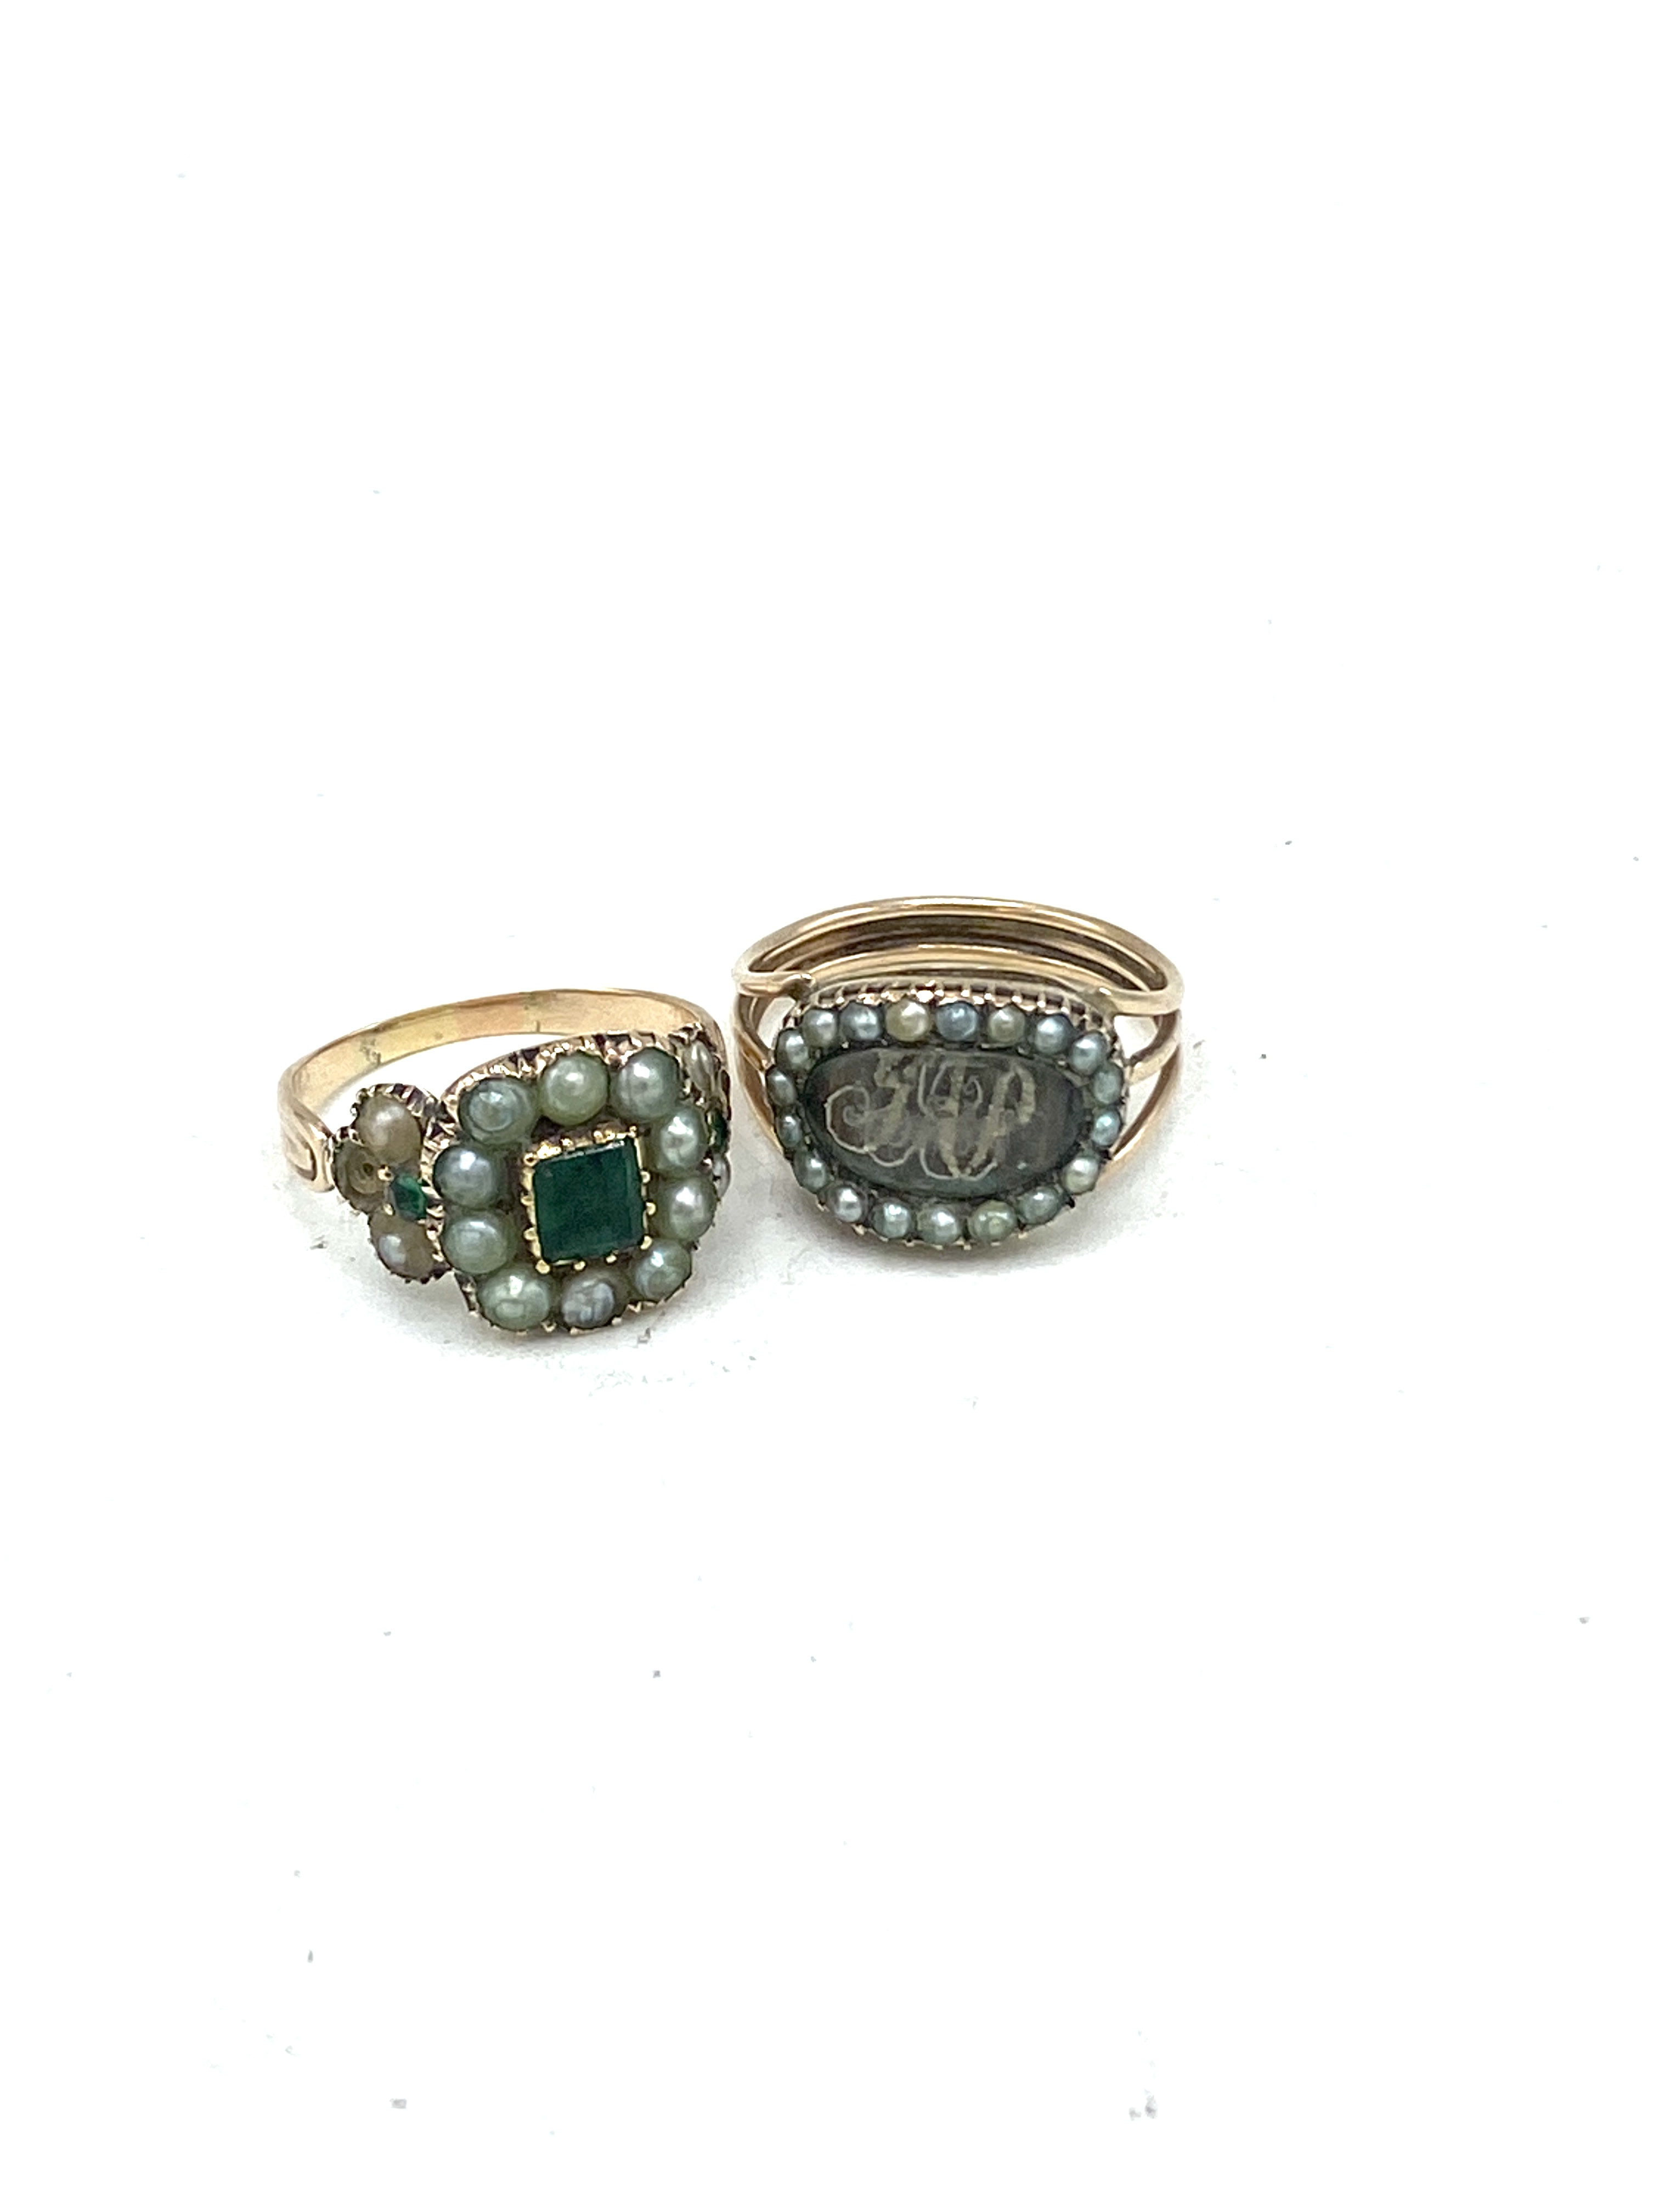 19th century emerald and pearl ring - Image 8 of 8